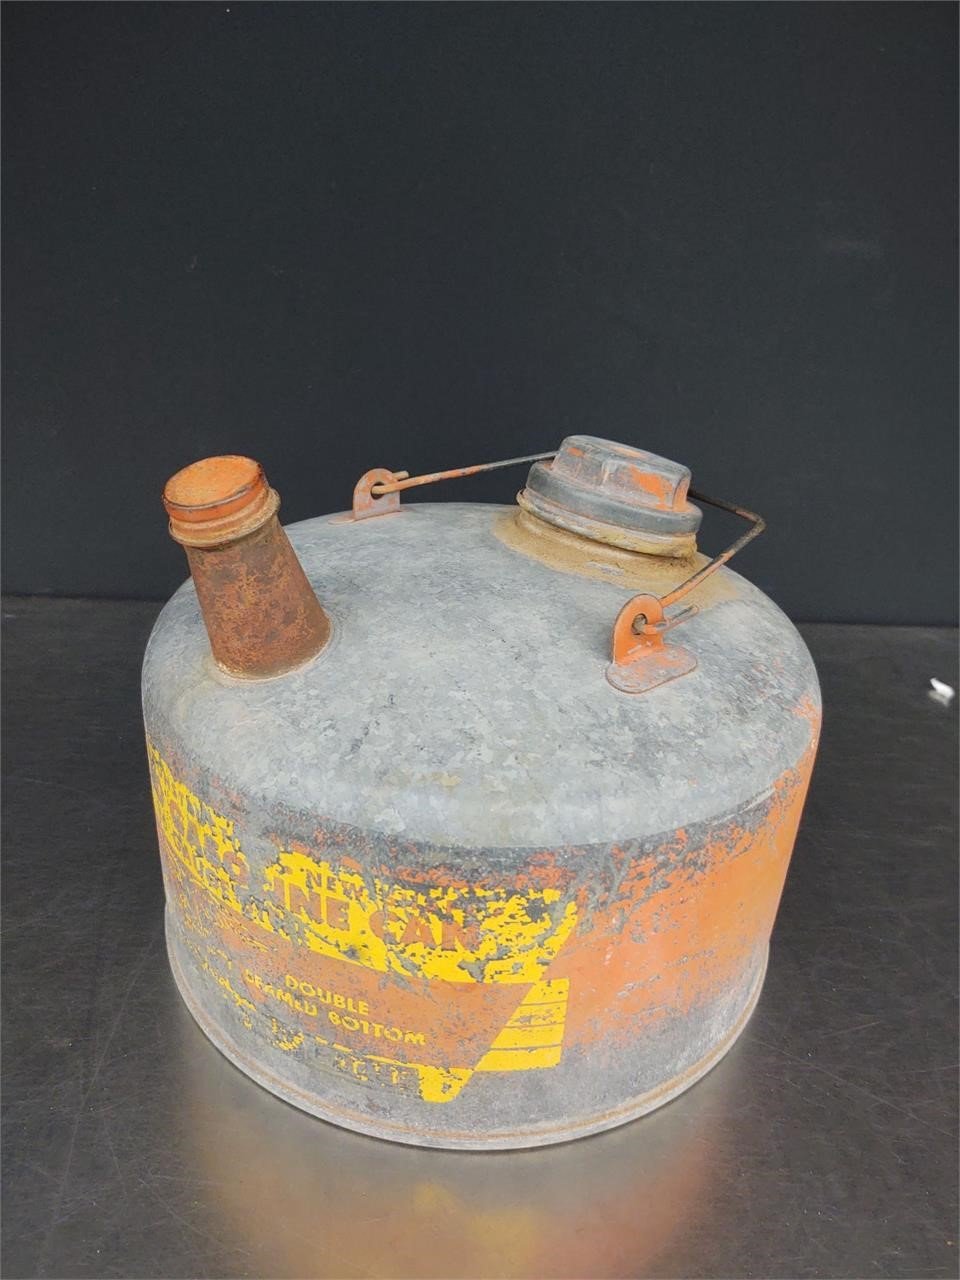 Vintage Galvanized Gas Can